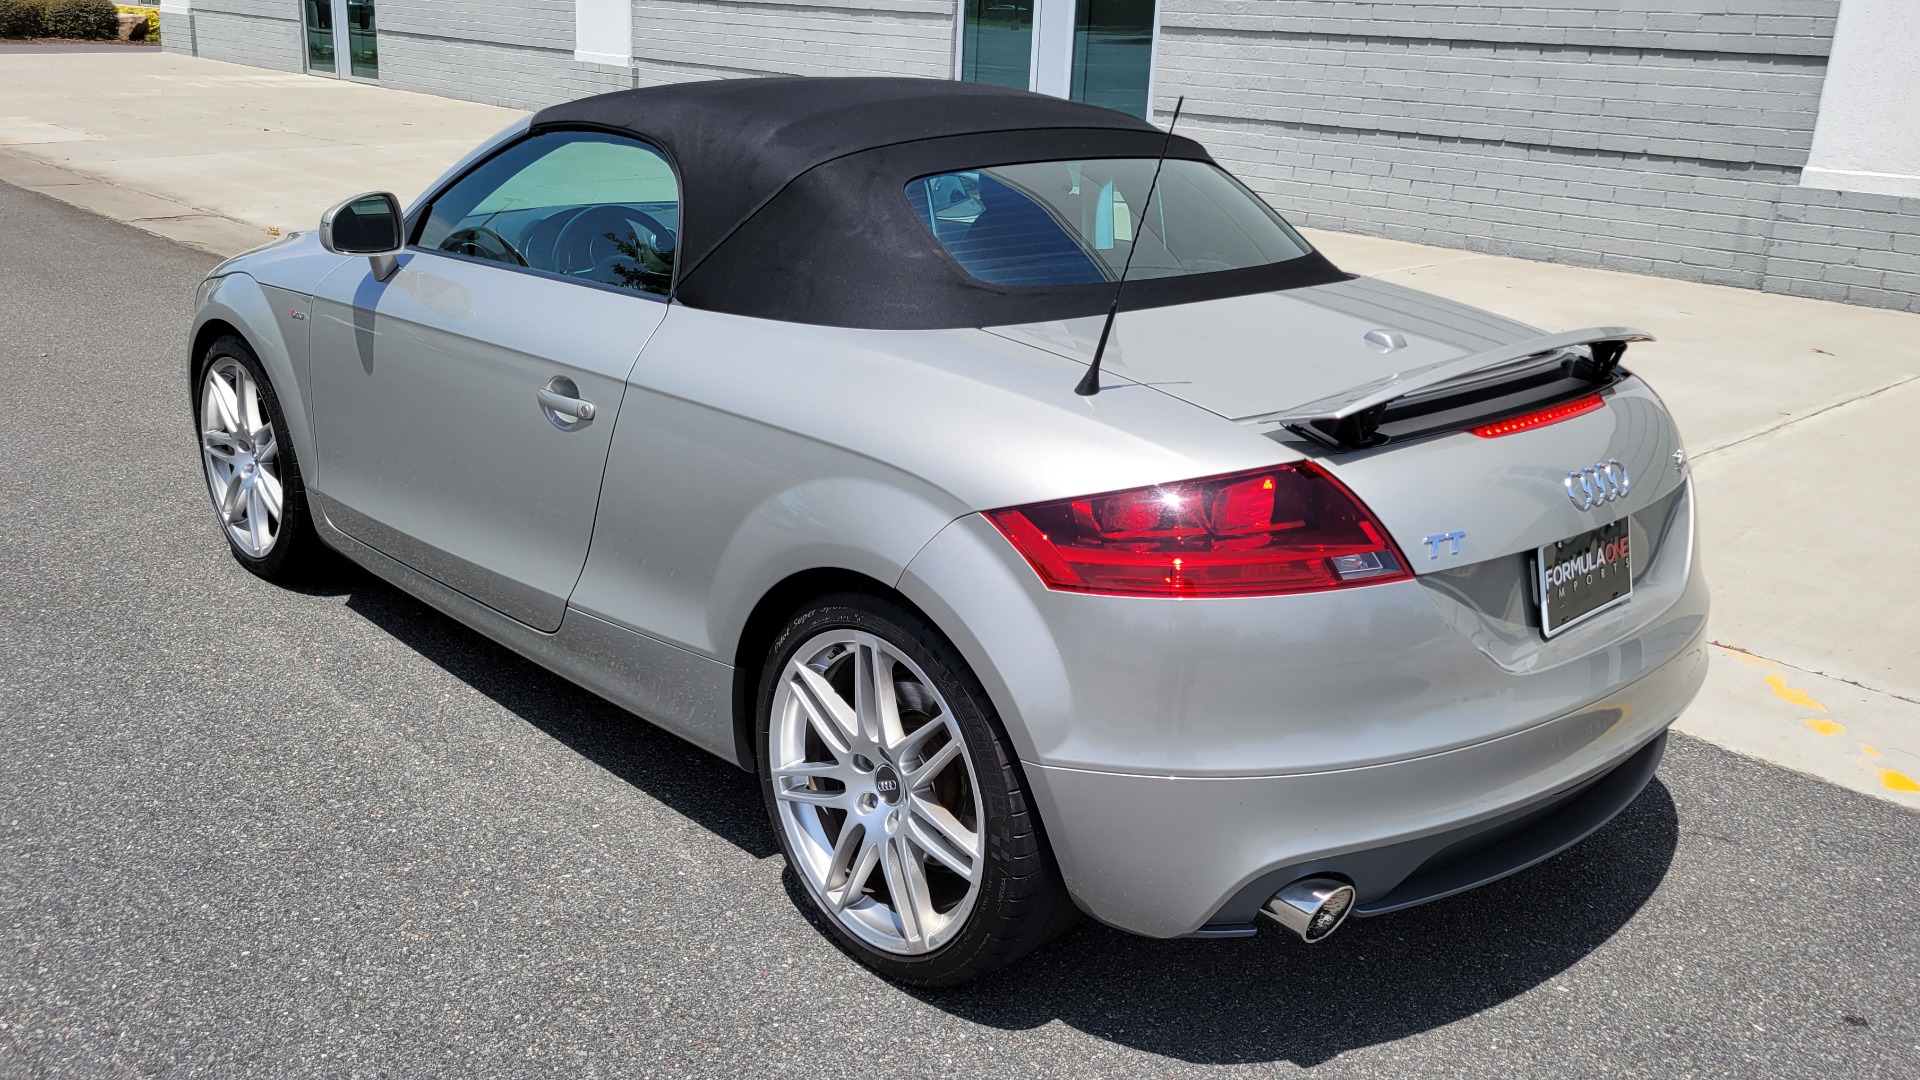 Used 2008 Audi TT 3.2L CONVERTIBLE / MANUAL / 19IN WHEELS / LOW MILES for sale Sold at Formula Imports in Charlotte NC 28227 6